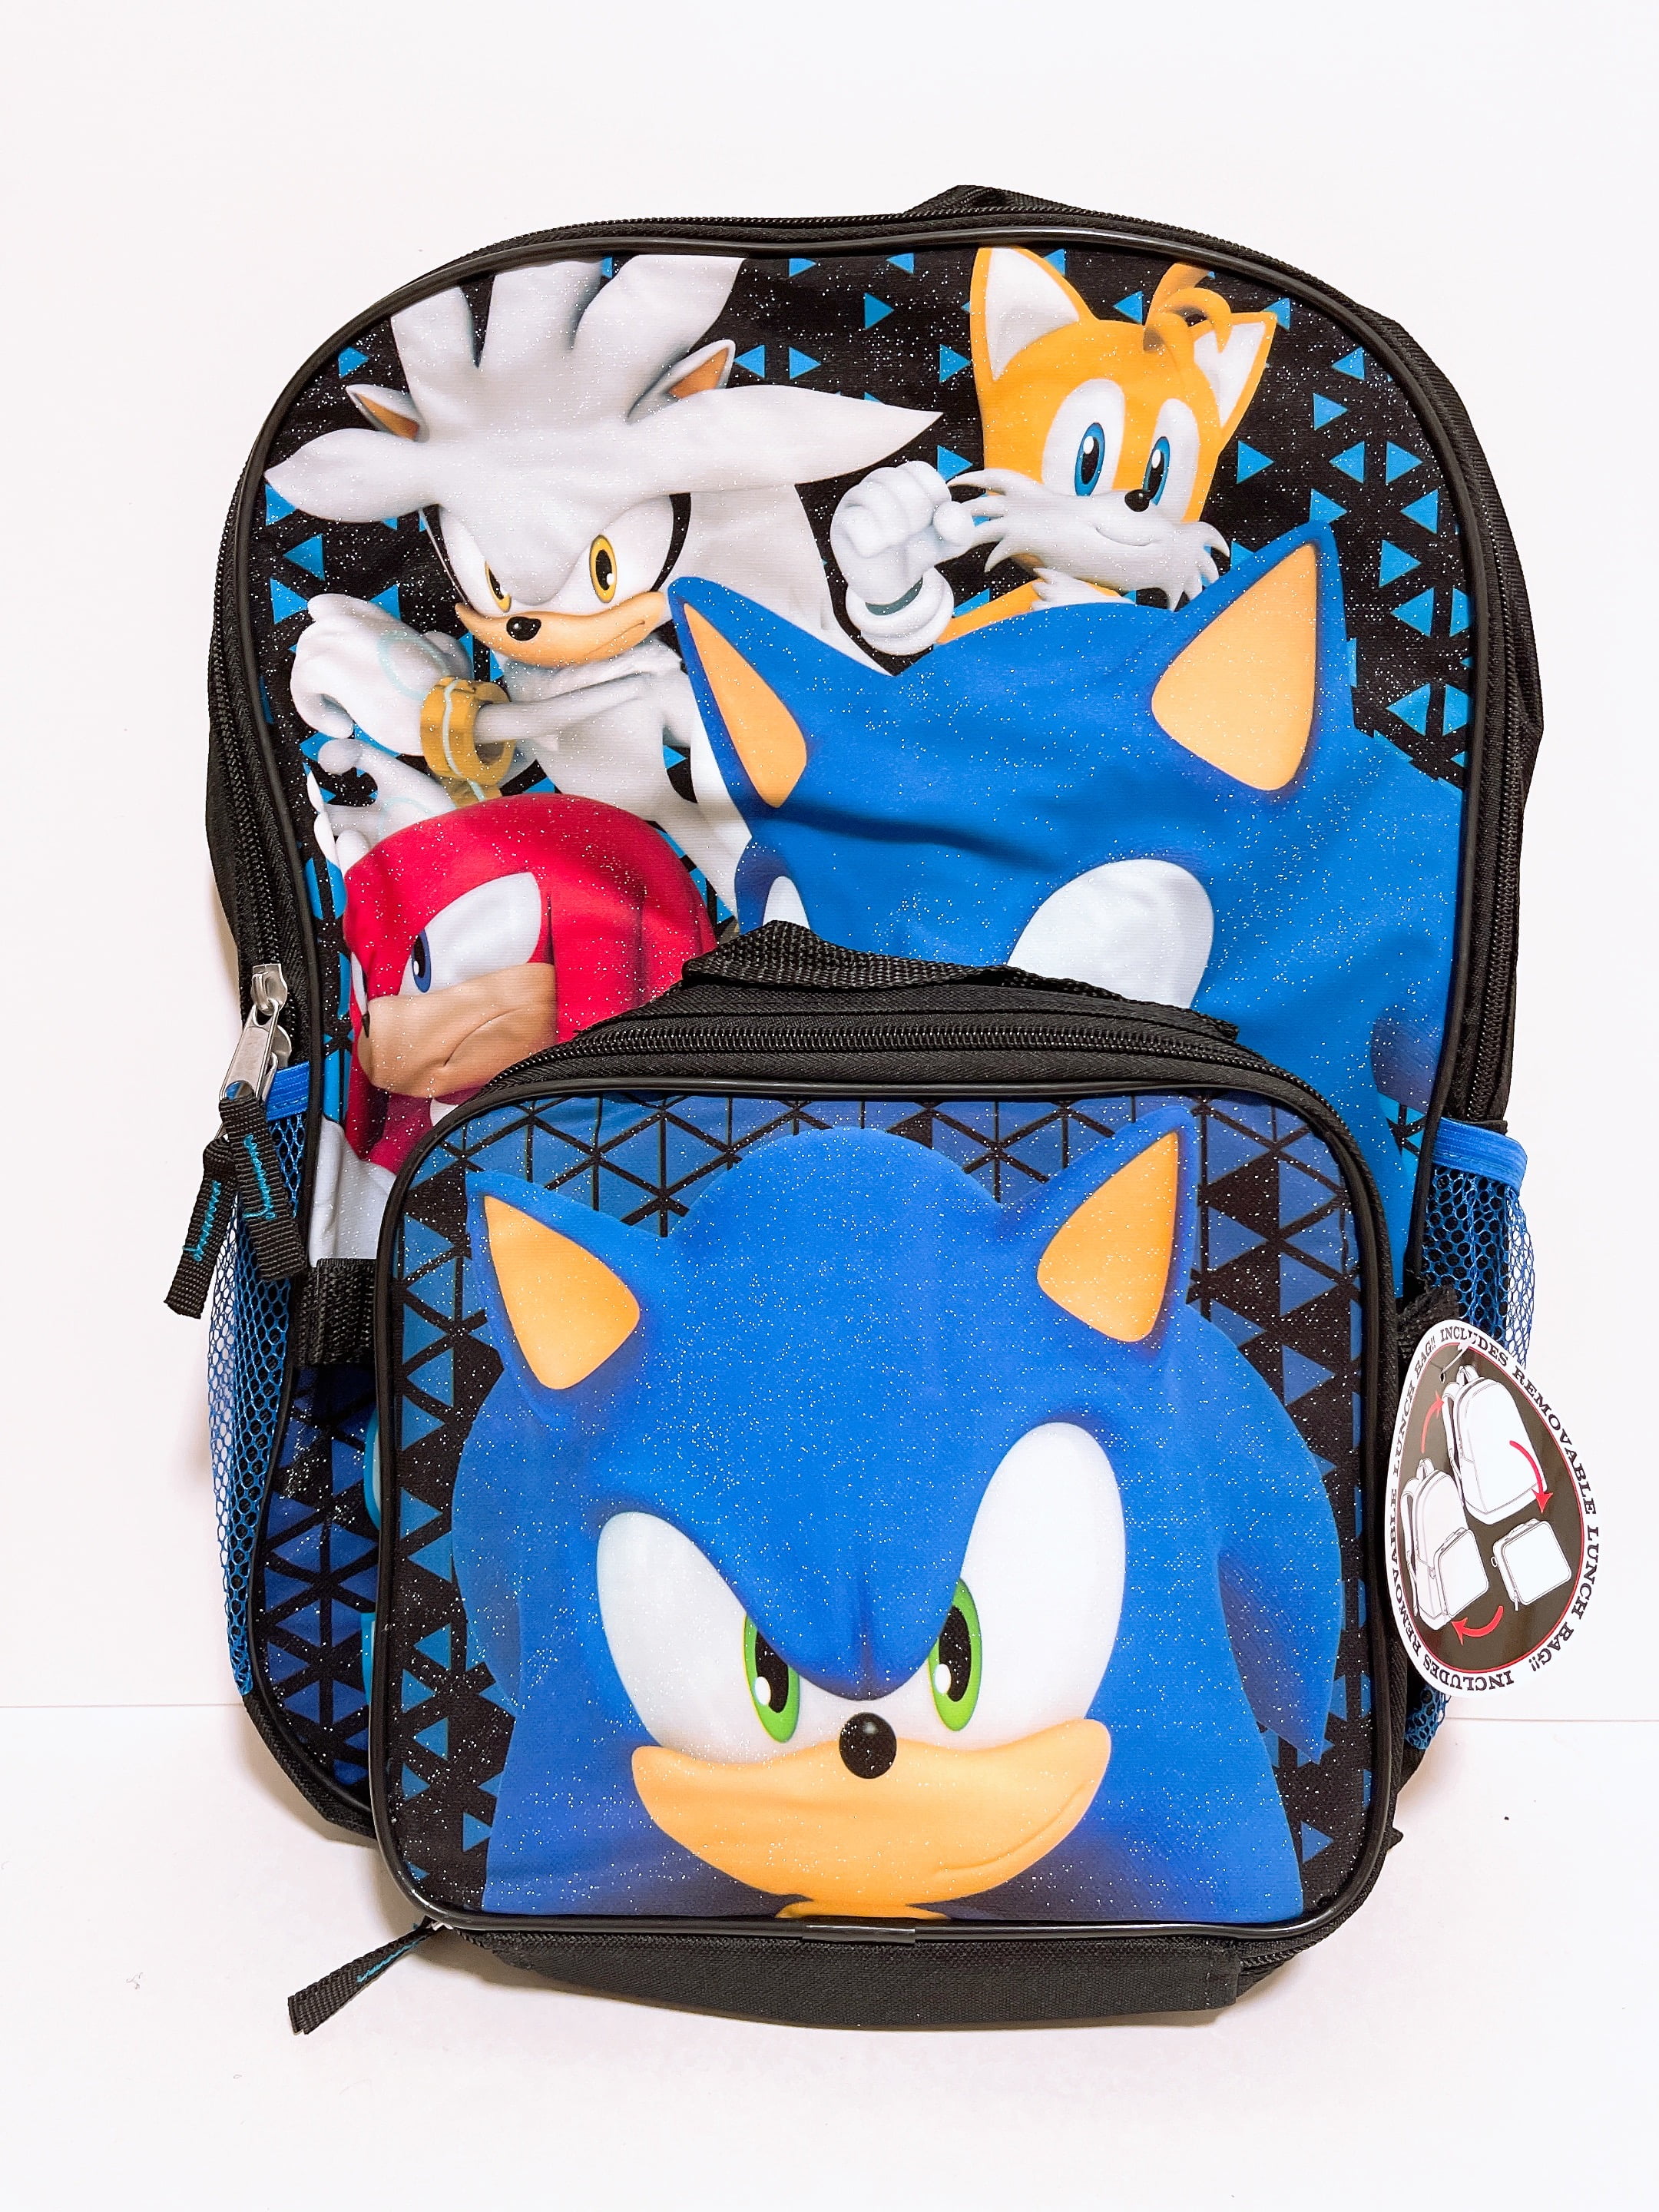 Sonic The Hedgehog Insulated Lunch Box